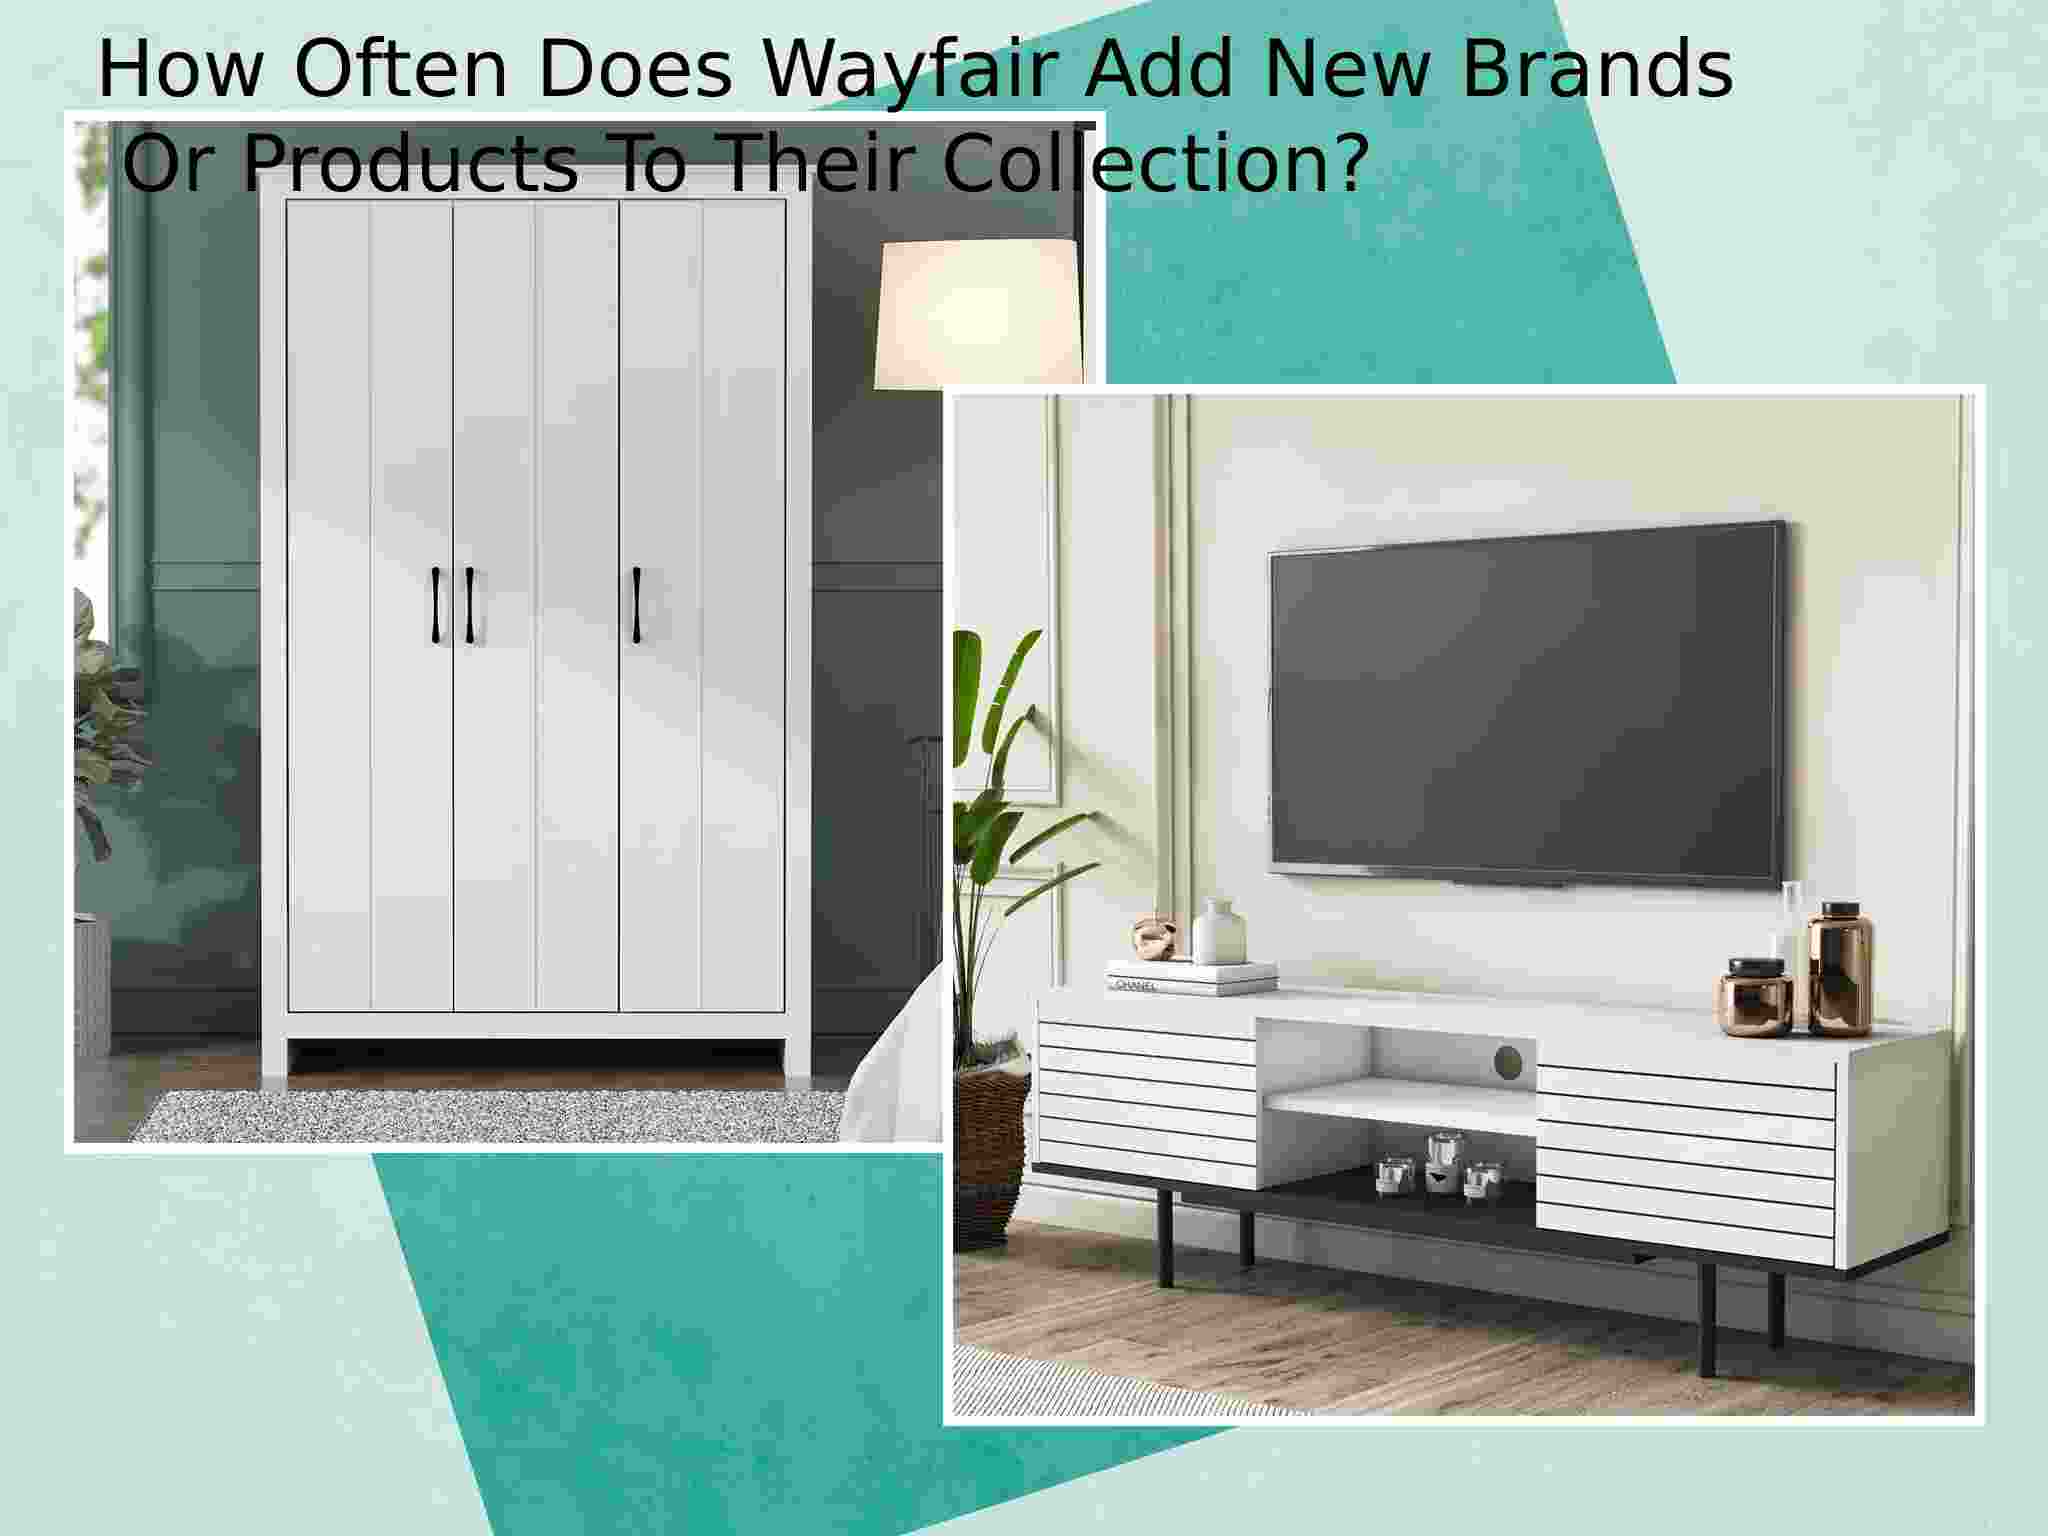 How Often Does Wayfair Add New Brands Or Products To Their Collection?